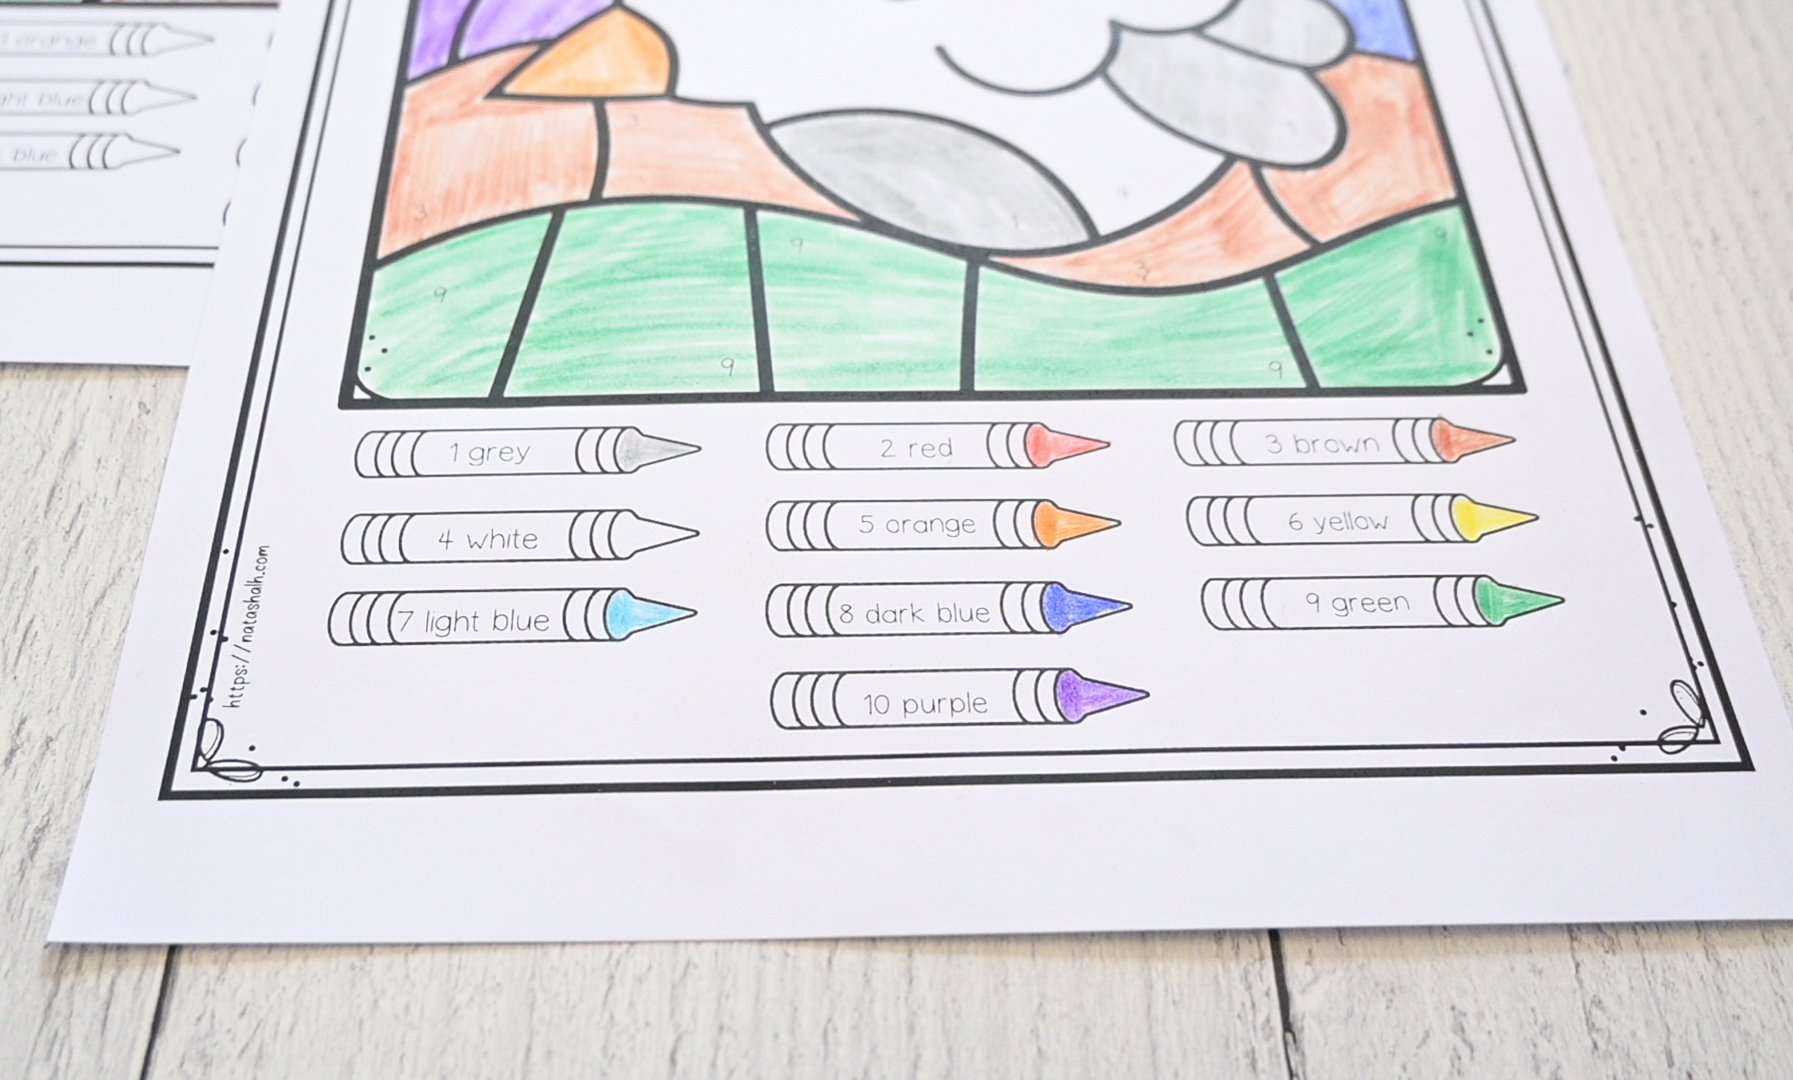 A photograph of a color by number page with numbers 1-10 and crayon tips colored with the appropriate color to make a key for children